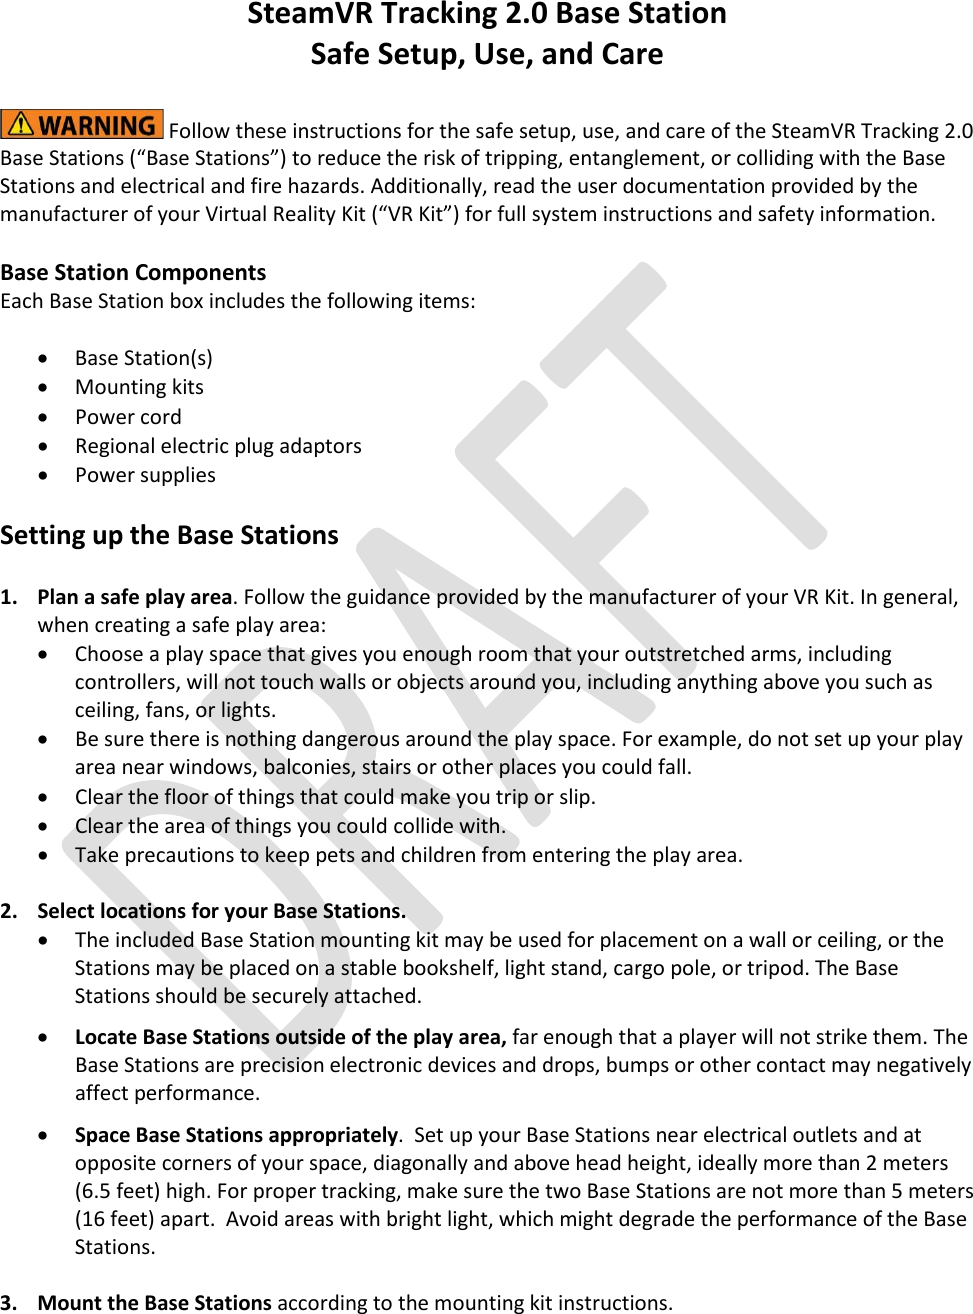    SteamVR Tracking 2.0 Base Station  Safe Setup, Use, and Care   Follow these instructions for the safe setup, use, and care of the SteamVR Tracking 2.0 Base Stations (“Base Stations”) to reduce the risk of tripping, entanglement, or colliding with the Base Stations and electrical and fire hazards. Additionally, read the user documentation provided by the manufacturer of your Virtual Reality Kit (“VR Kit”) for full system instructions and safety information.    Base Station Components Each Base Station box includes the following items:  • Base Station(s) • Mounting kits  • Power cord • Regional electric plug adaptors • Power supplies  Setting up the Base Stations  1.  Plan a safe play area. Follow the guidance provided by the manufacturer of your VR Kit. In general, when creating a safe play area: • Choose a play space that gives you enough room that your outstretched arms, including controllers, will not touch walls or objects around you, including anything above you such as ceiling, fans, or lights. • Be sure there is nothing dangerous around the play space. For example, do not set up your play area near windows, balconies, stairs or other places you could fall.   • Clear the floor of things that could make you trip or slip. • Clear the area of things you could collide with. • Take precautions to keep pets and children from entering the play area.    2.  Select locations for your Base Stations.  • The included Base Station mounting kit may be used for placement on a wall or ceiling, or the Stations may be placed on a stable bookshelf, light stand, cargo pole, or tripod. The Base Stations should be securely attached.   • Locate Base Stations outside of the play area, far enough that a player will not strike them. The Base Stations are precision electronic devices and drops, bumps or other contact may negatively affect performance.  • Space Base Stations appropriately.  Set up your Base Stations near electrical outlets and at opposite corners of your space, diagonally and above head height, ideally more than 2 meters (6.5 feet) high. For proper tracking, make sure the two Base Stations are not more than 5 meters (16 feet) apart.  Avoid areas with bright light, which might degrade the performance of the Base Stations.     3.  Mount the Base Stations according to the mounting kit instructions.  